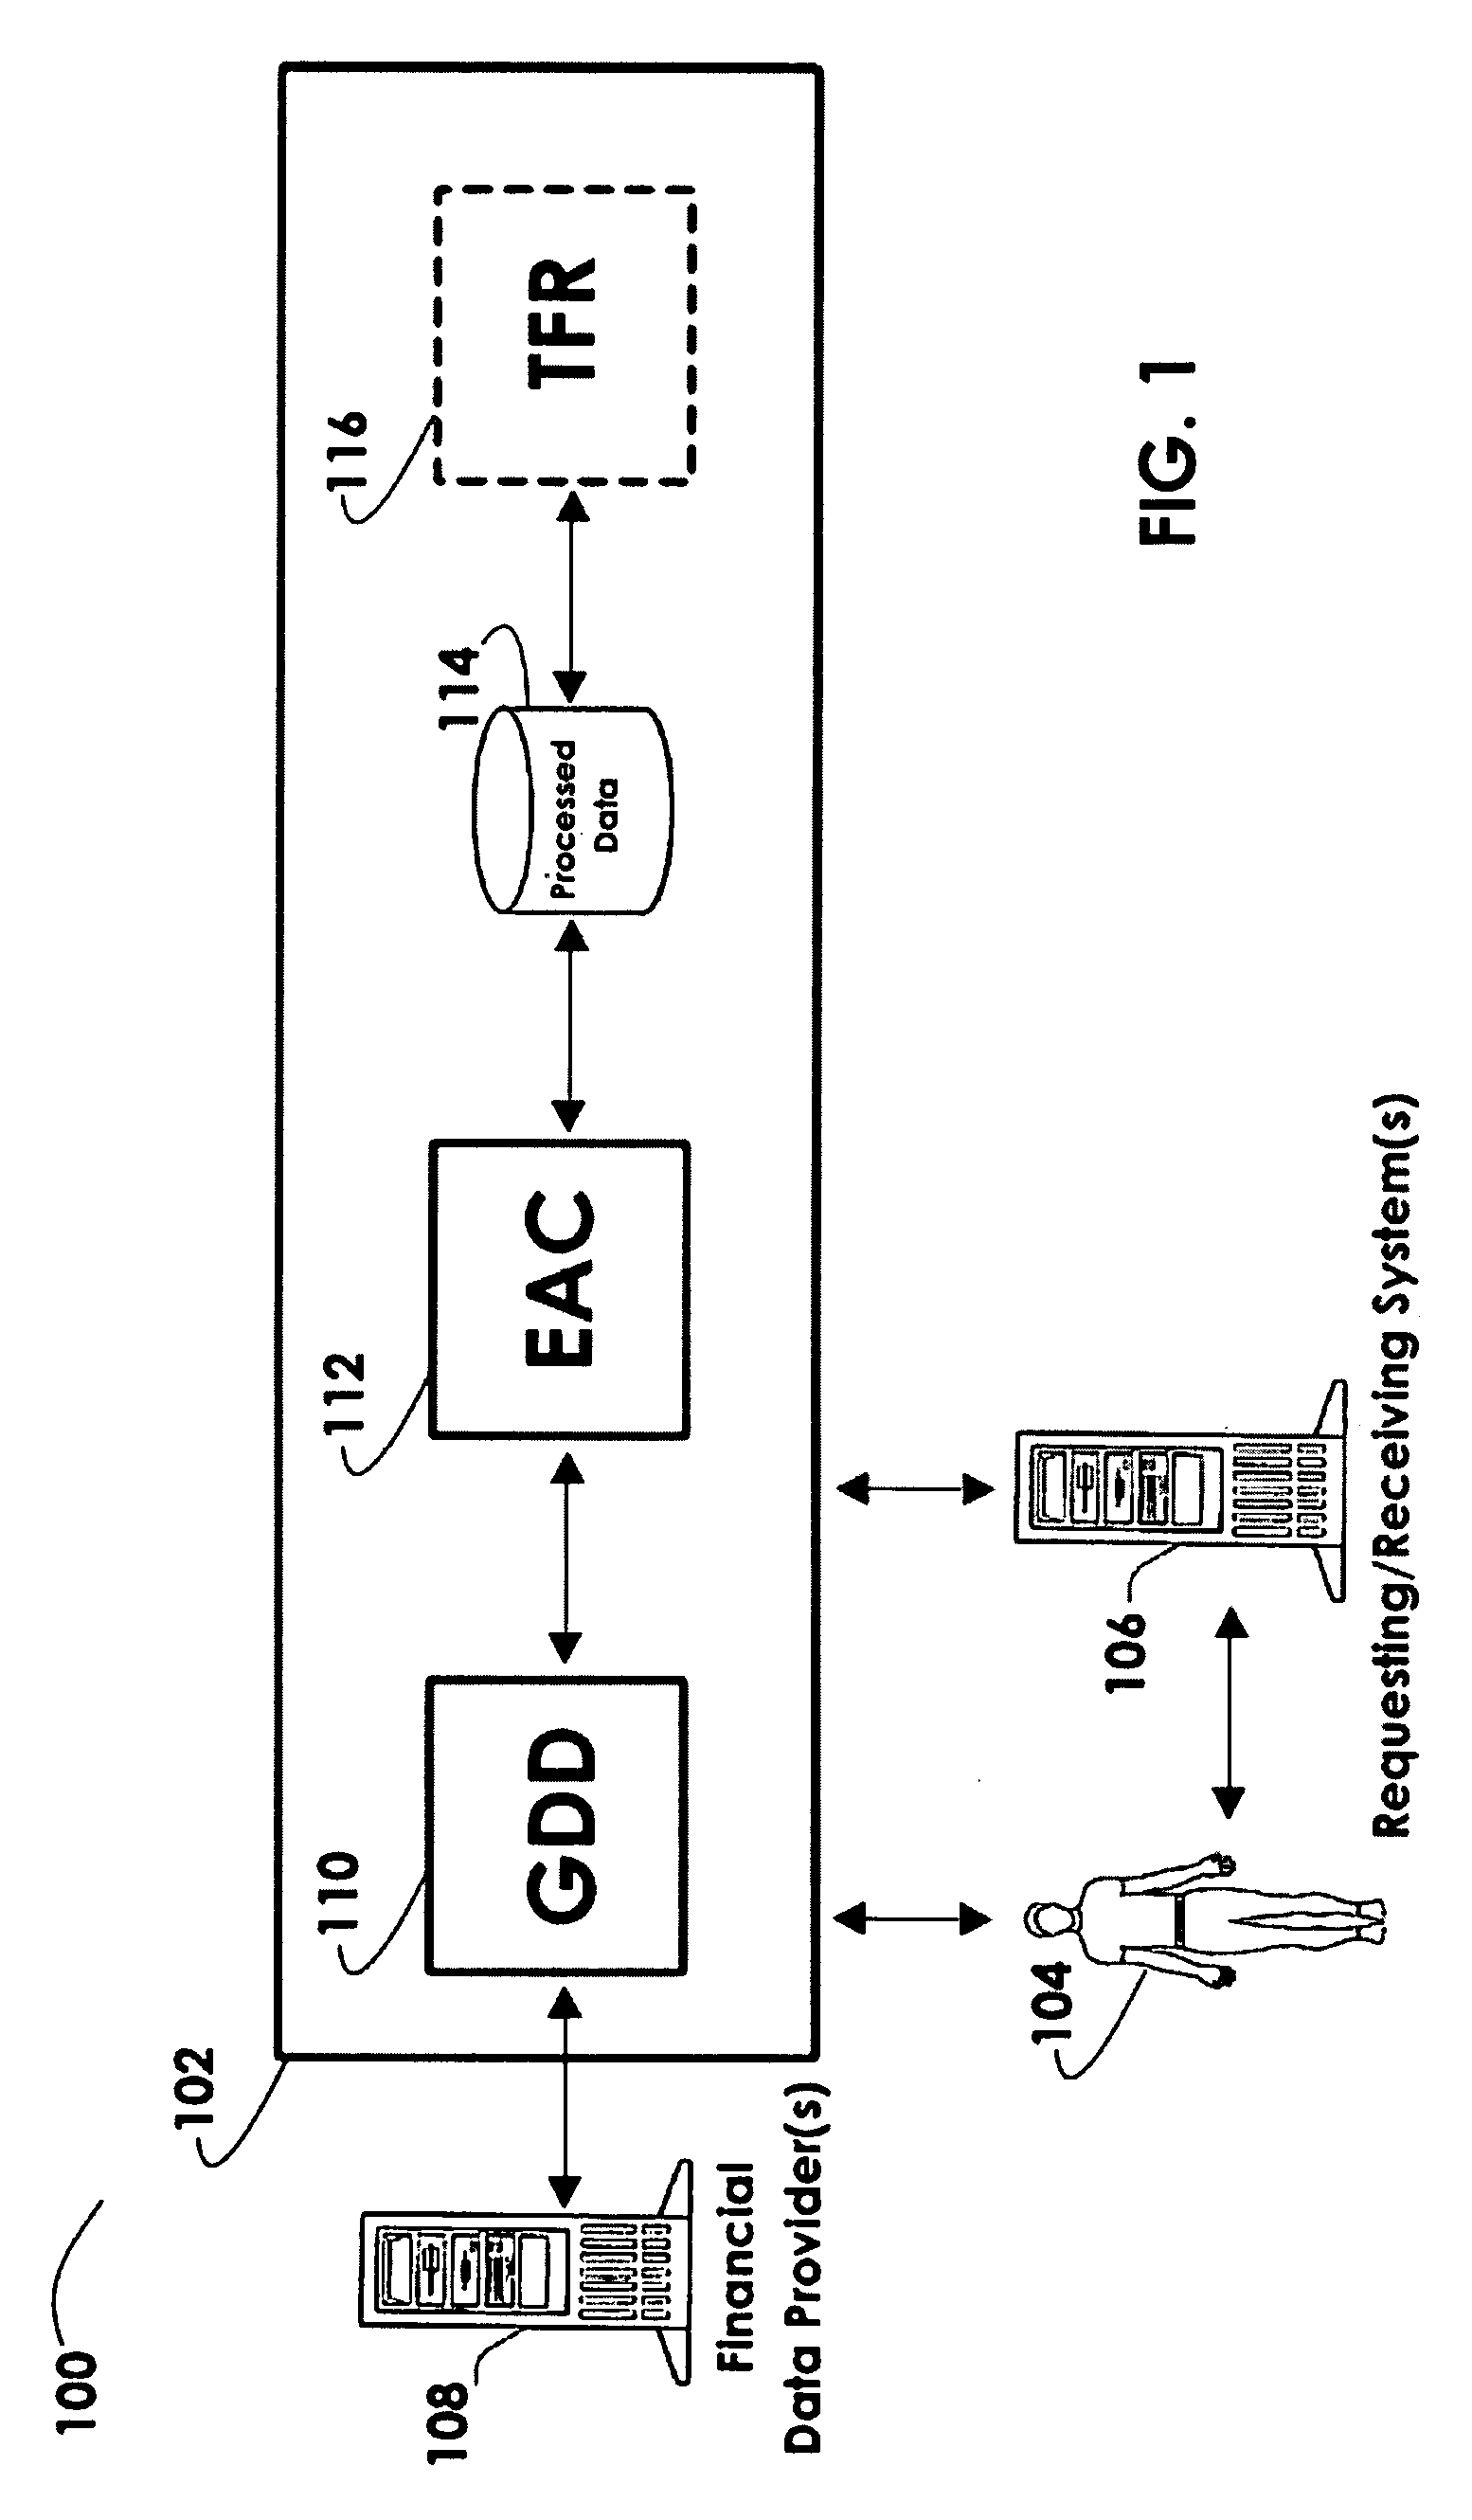 Systems and methods for electronic account certification and enhanced credit reporting